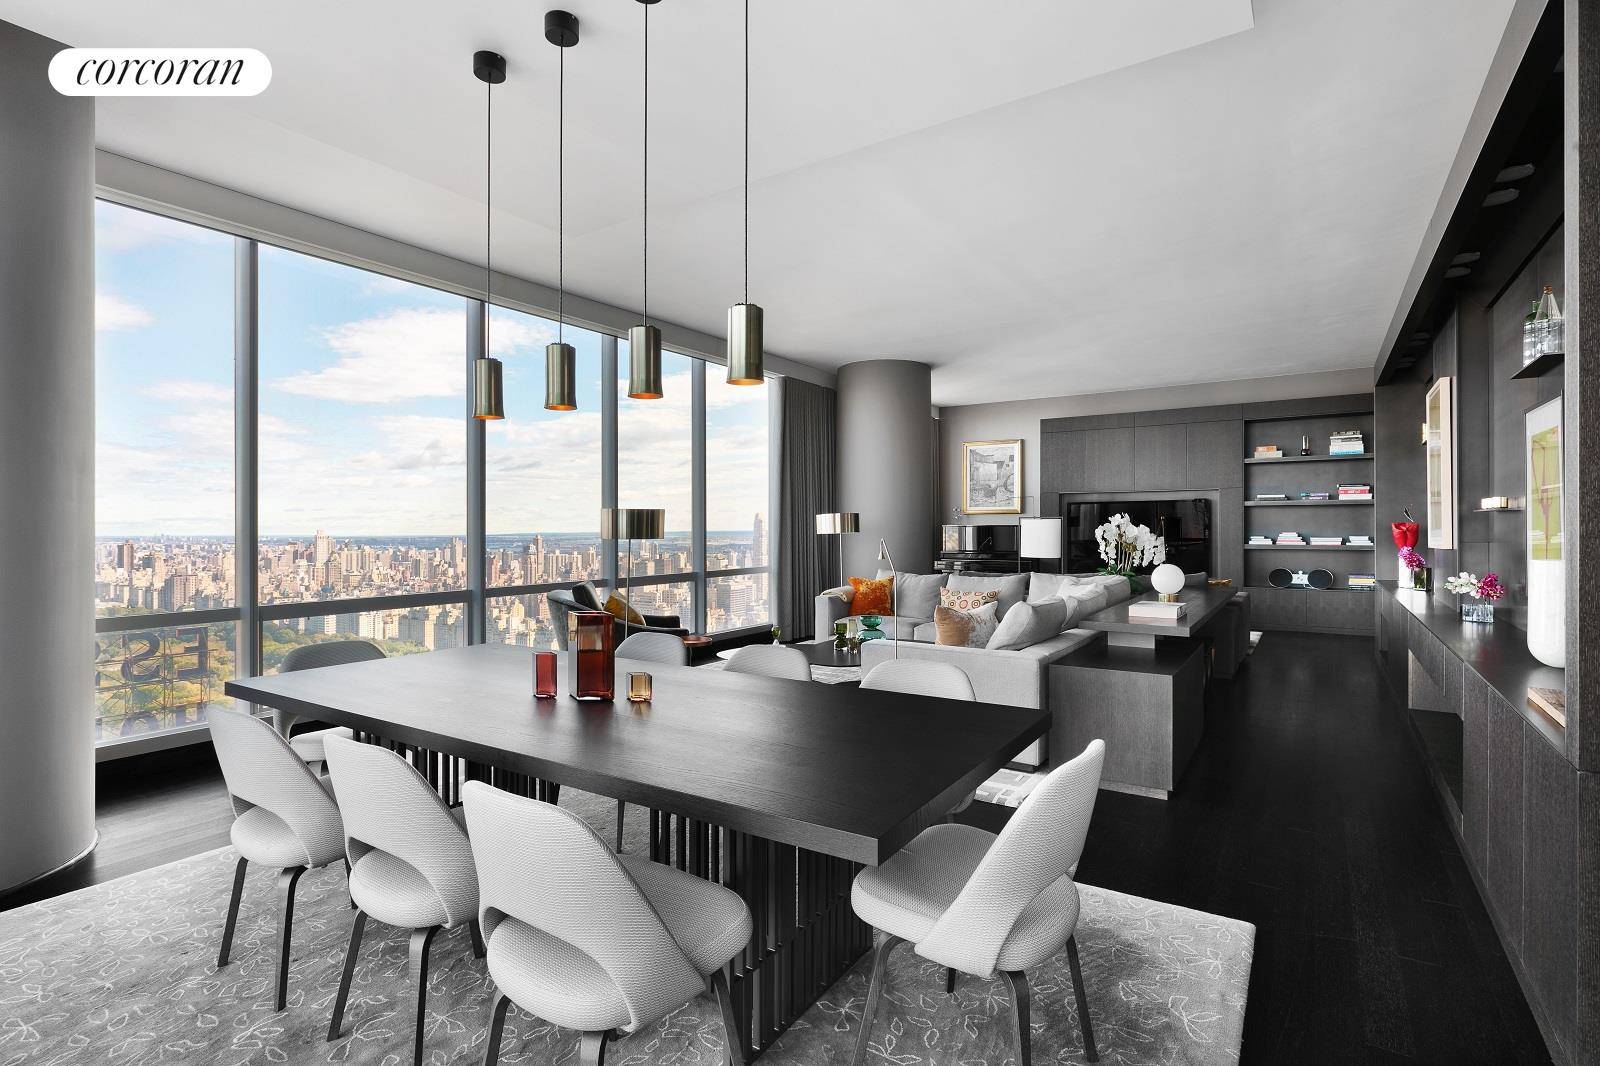 Residence 53A at One57 Incomparable Central Park Views and Design Three Bedrooms Three Baths Powder Room 3, 228 sqft This 53rd floor A line residence at One57 offers spectacular views ...